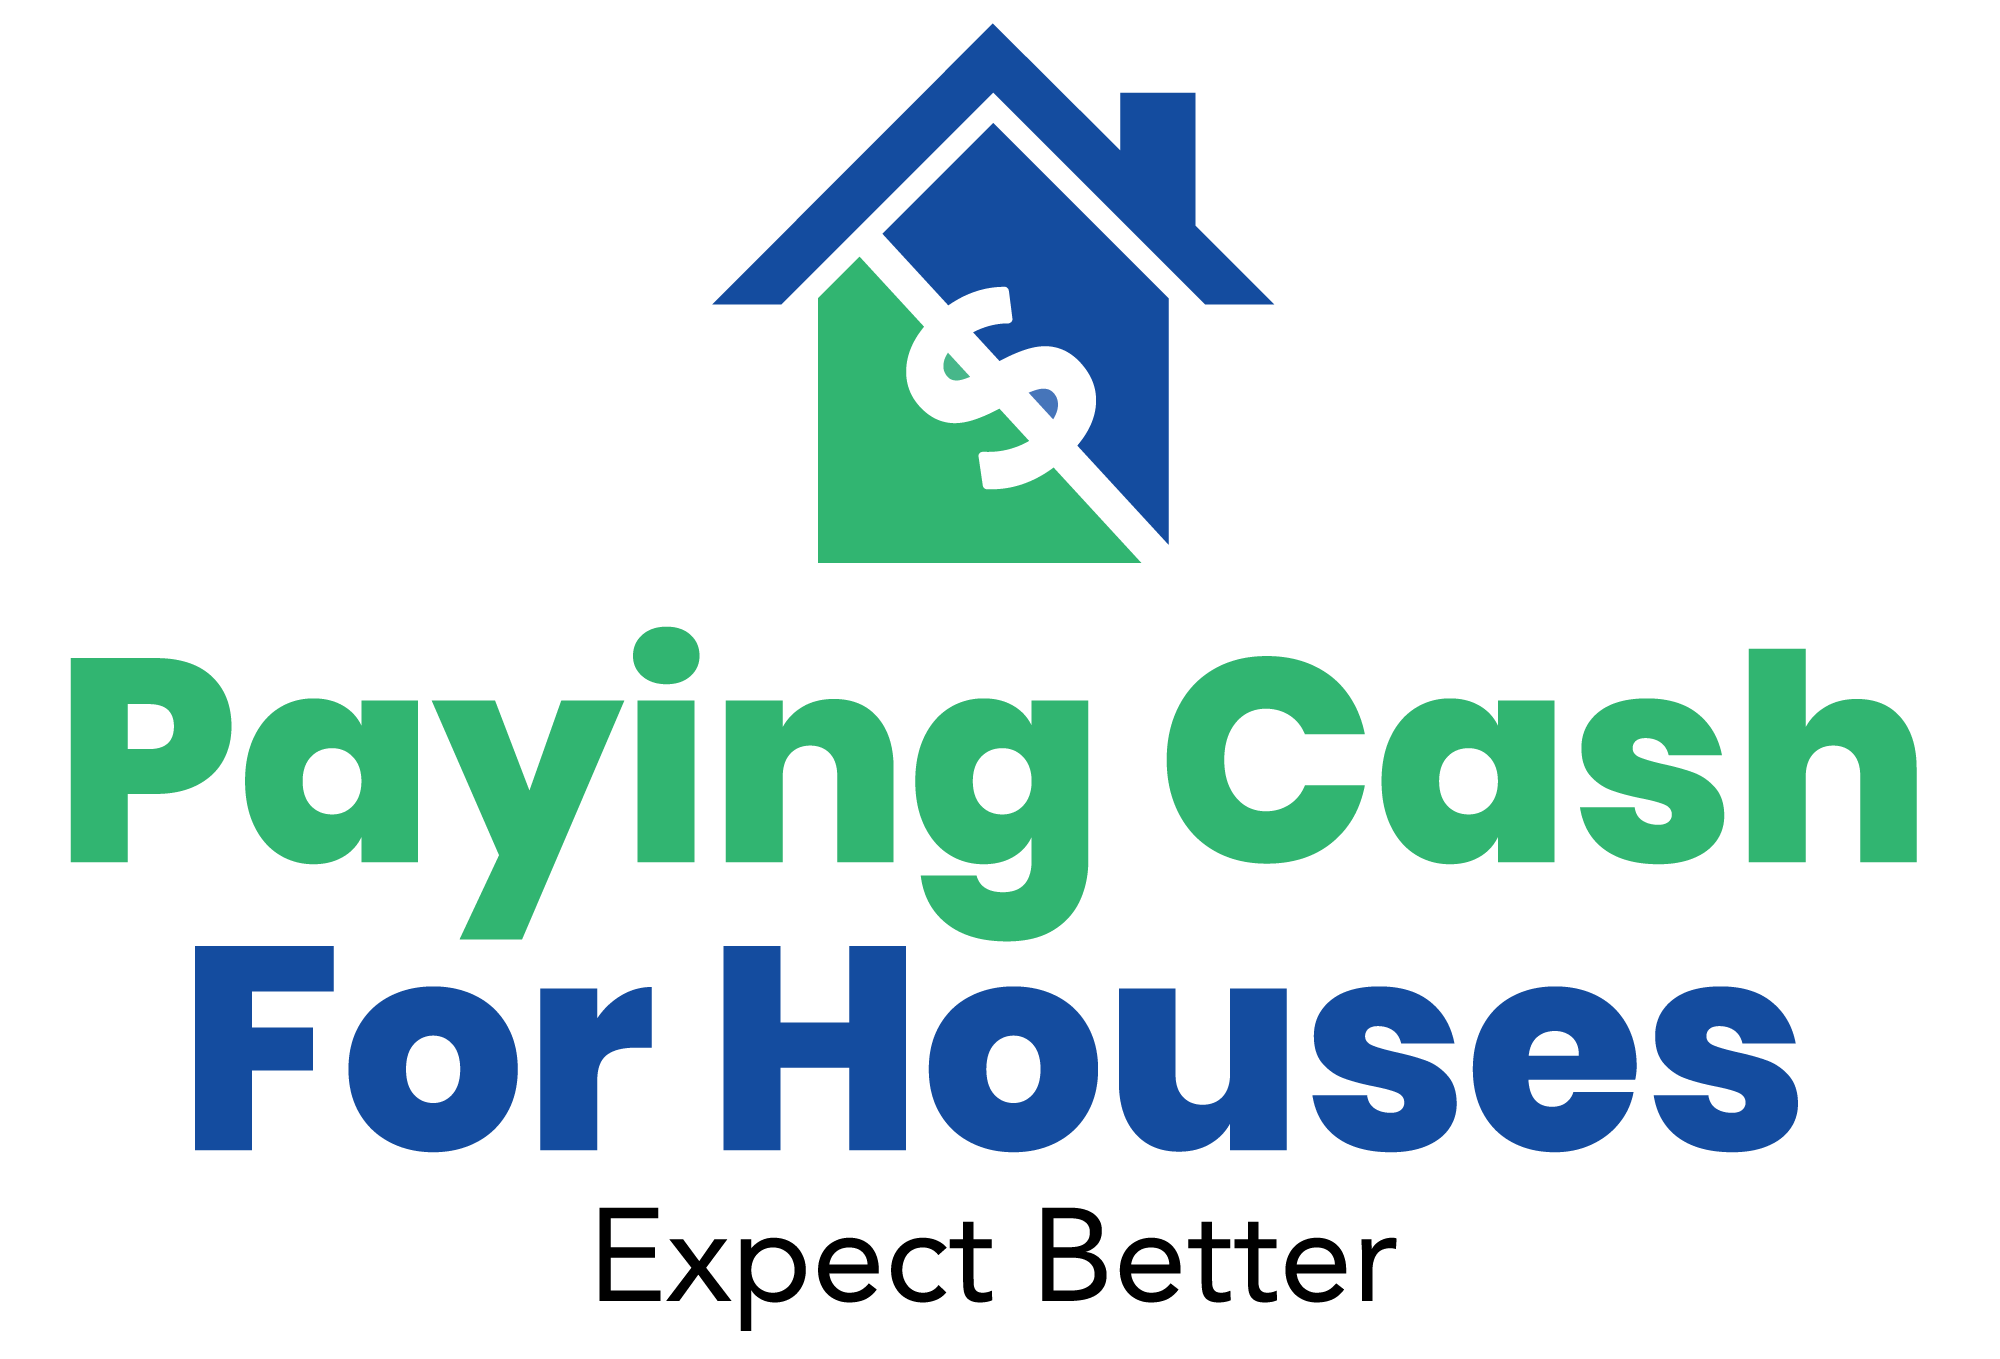 Paying Cash For Houses